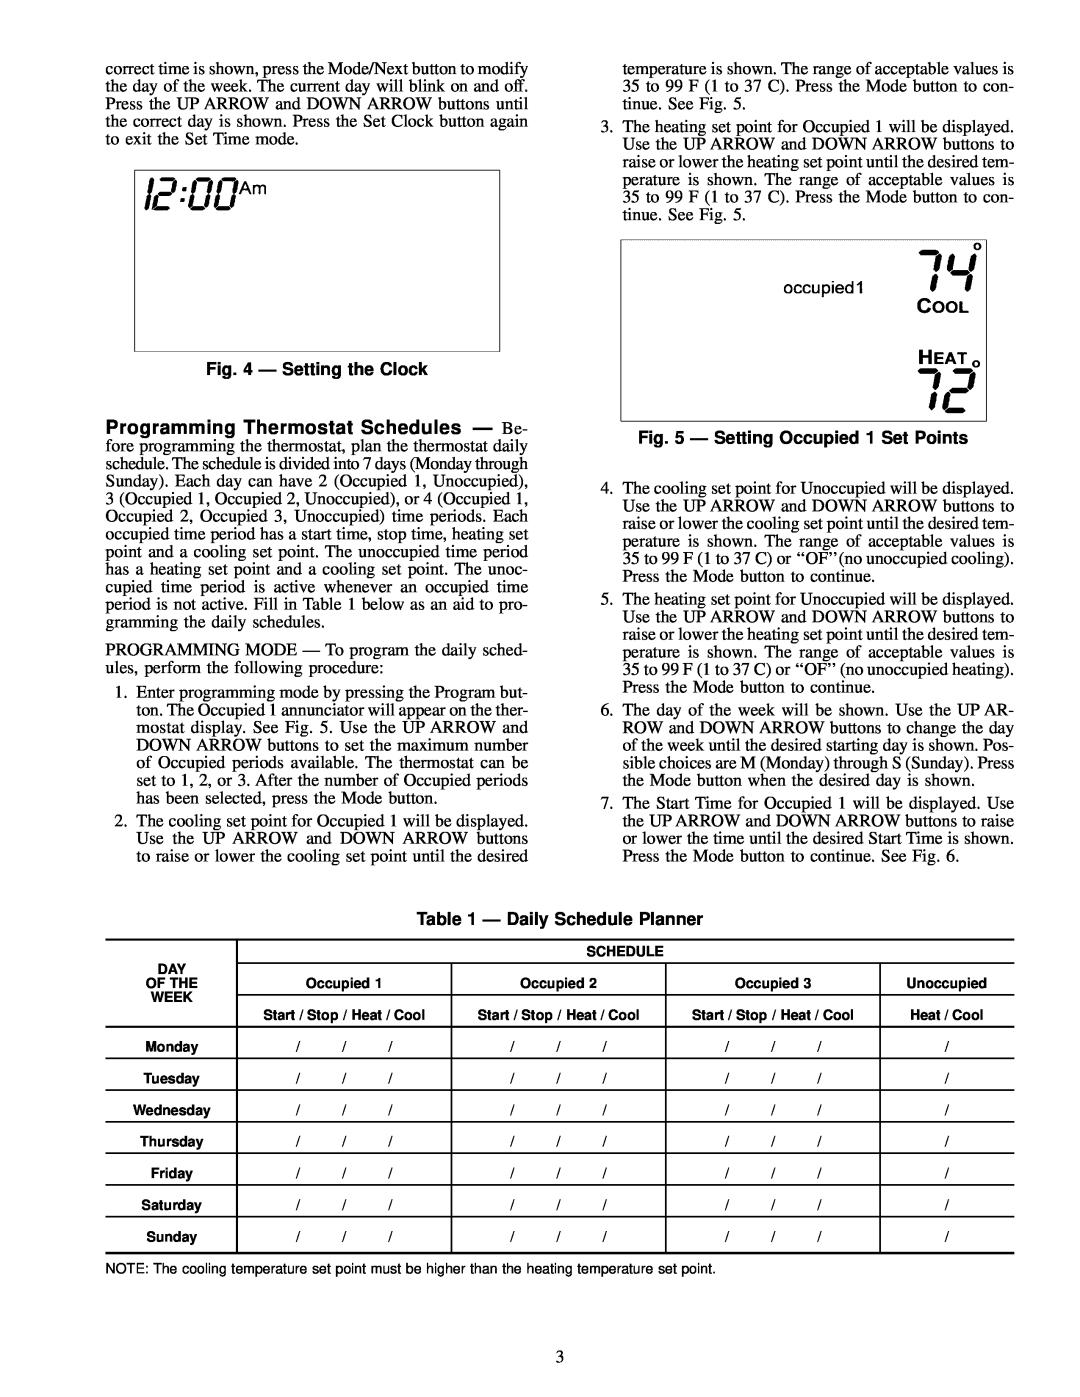 Carrier 33CS owner manual Ð Setting the Clock, Ð Setting Occupied 1 Set Points, Ð Daily Schedule Planner, Of The, Week 